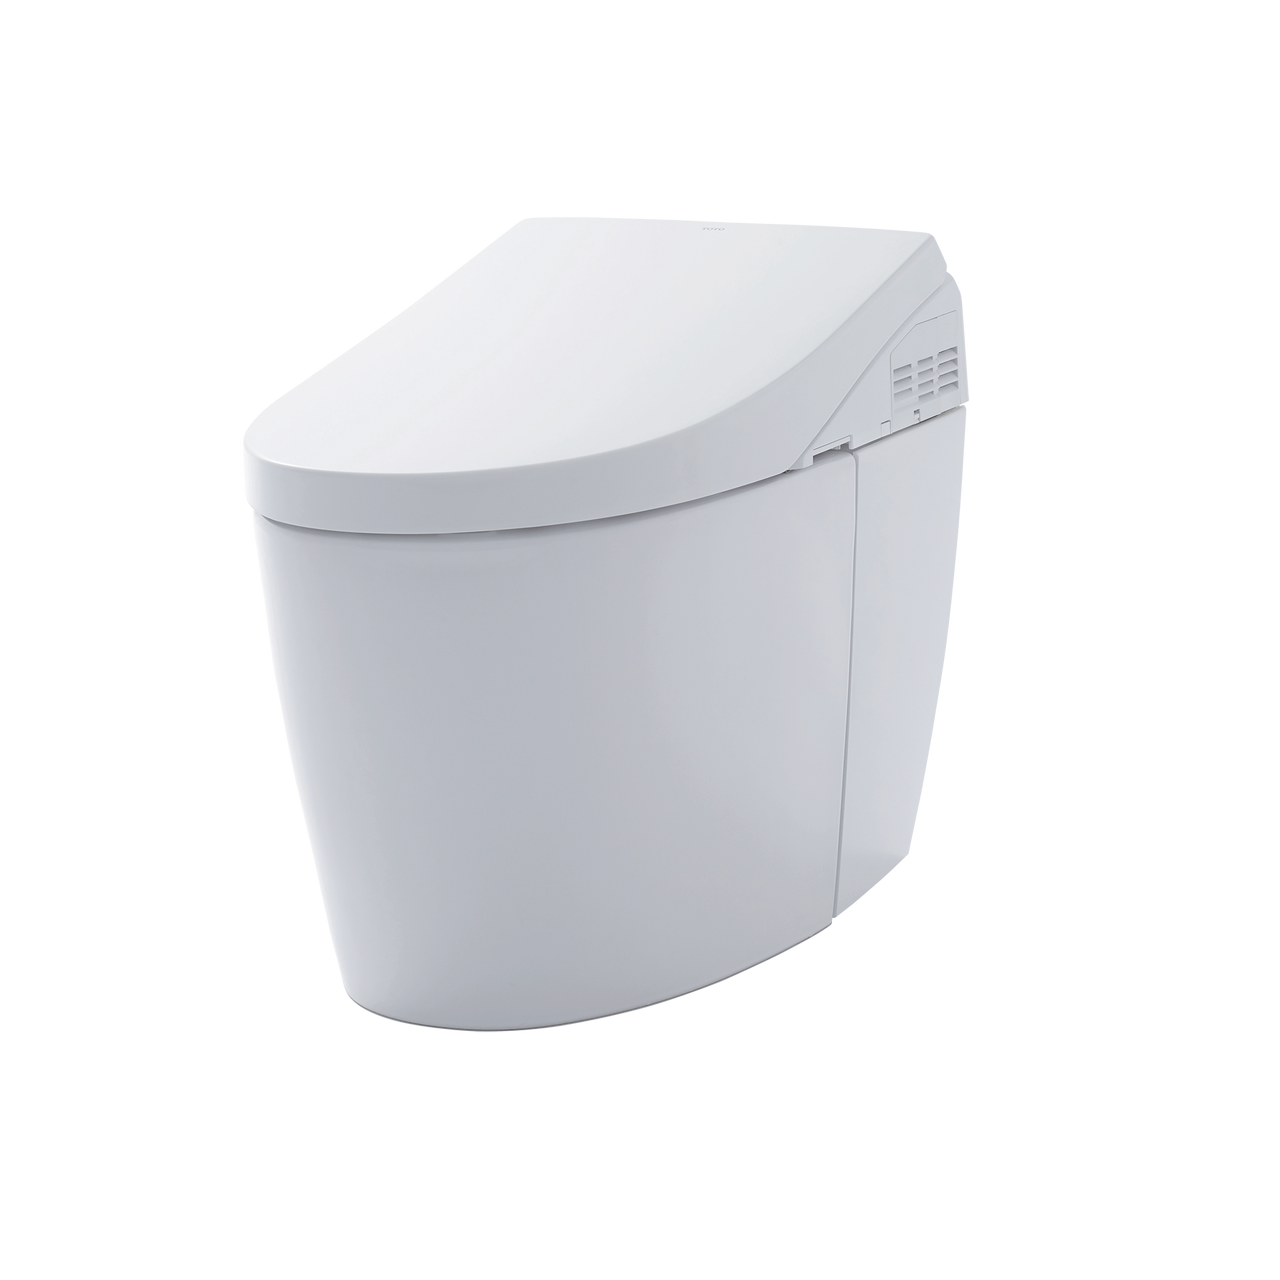 NEOREST AH Dual Flush 1.0 or 0.8 GPF Toilet with Intergeated Bidet Seat and EWATER+, - MS989CUMFG#01 - BNGBath